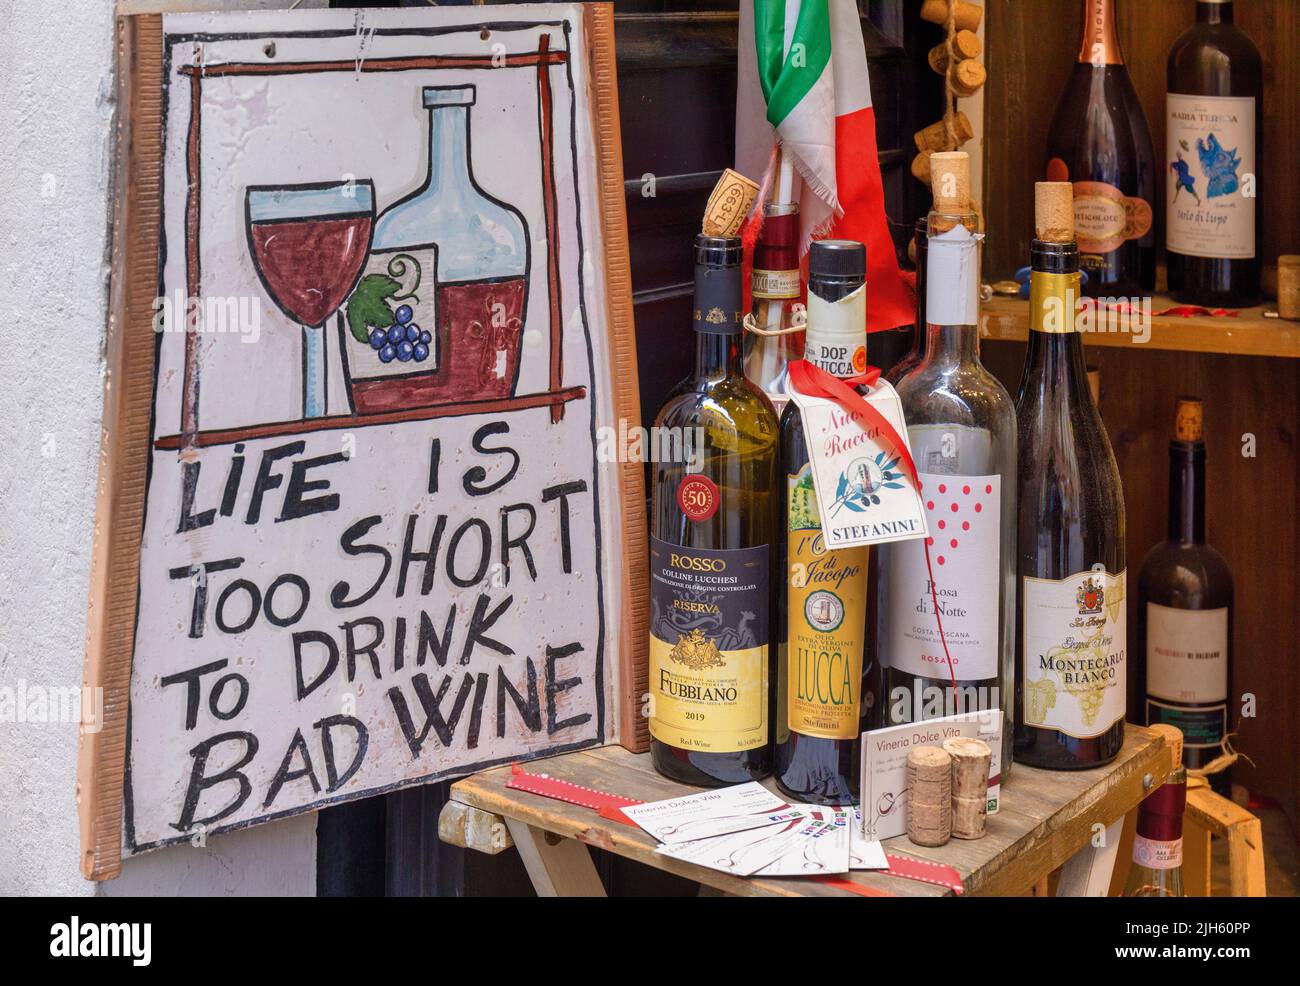 Life is Too Short to Drink Bad Wine.  Sign outside wine shop in Lucca, Lucca Province, Tuscany, Italy. Stock Photo